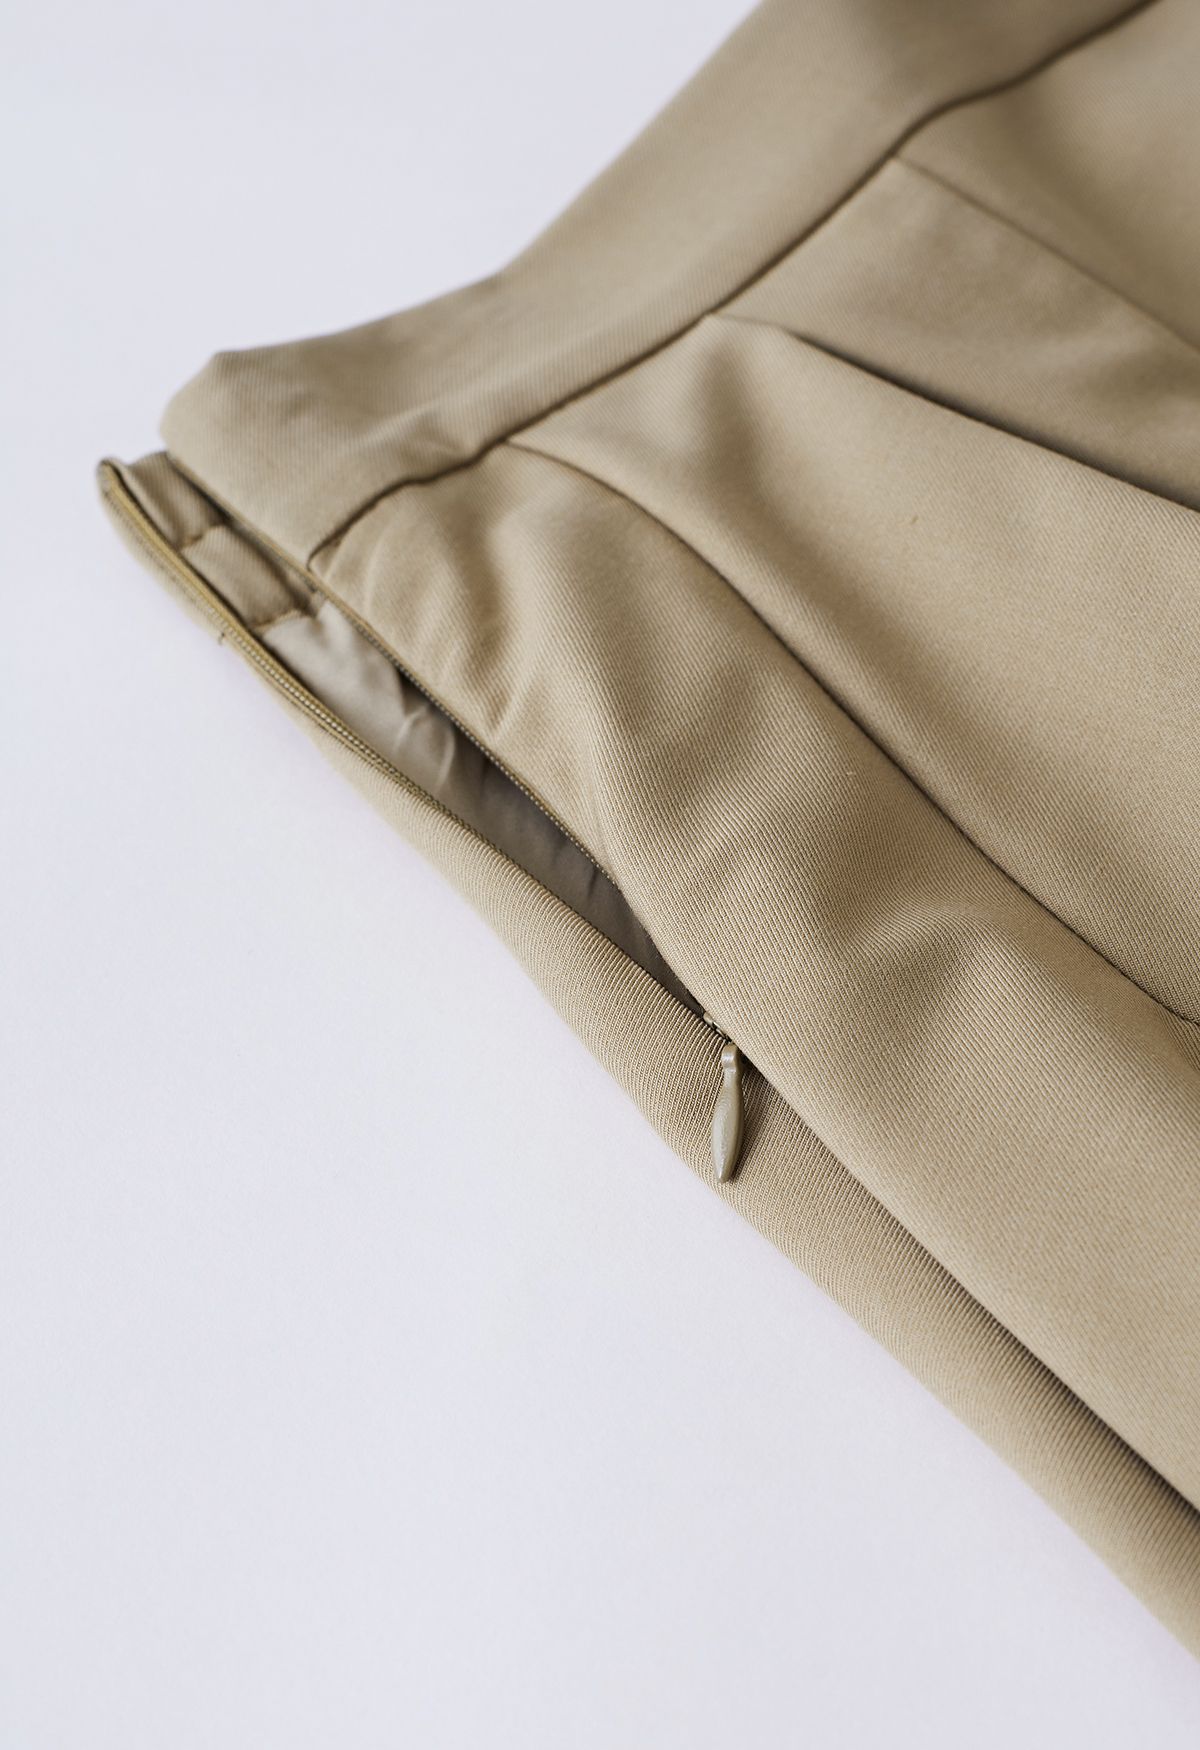 Seam Detailing Pleated A-Line Skirt in Khaki